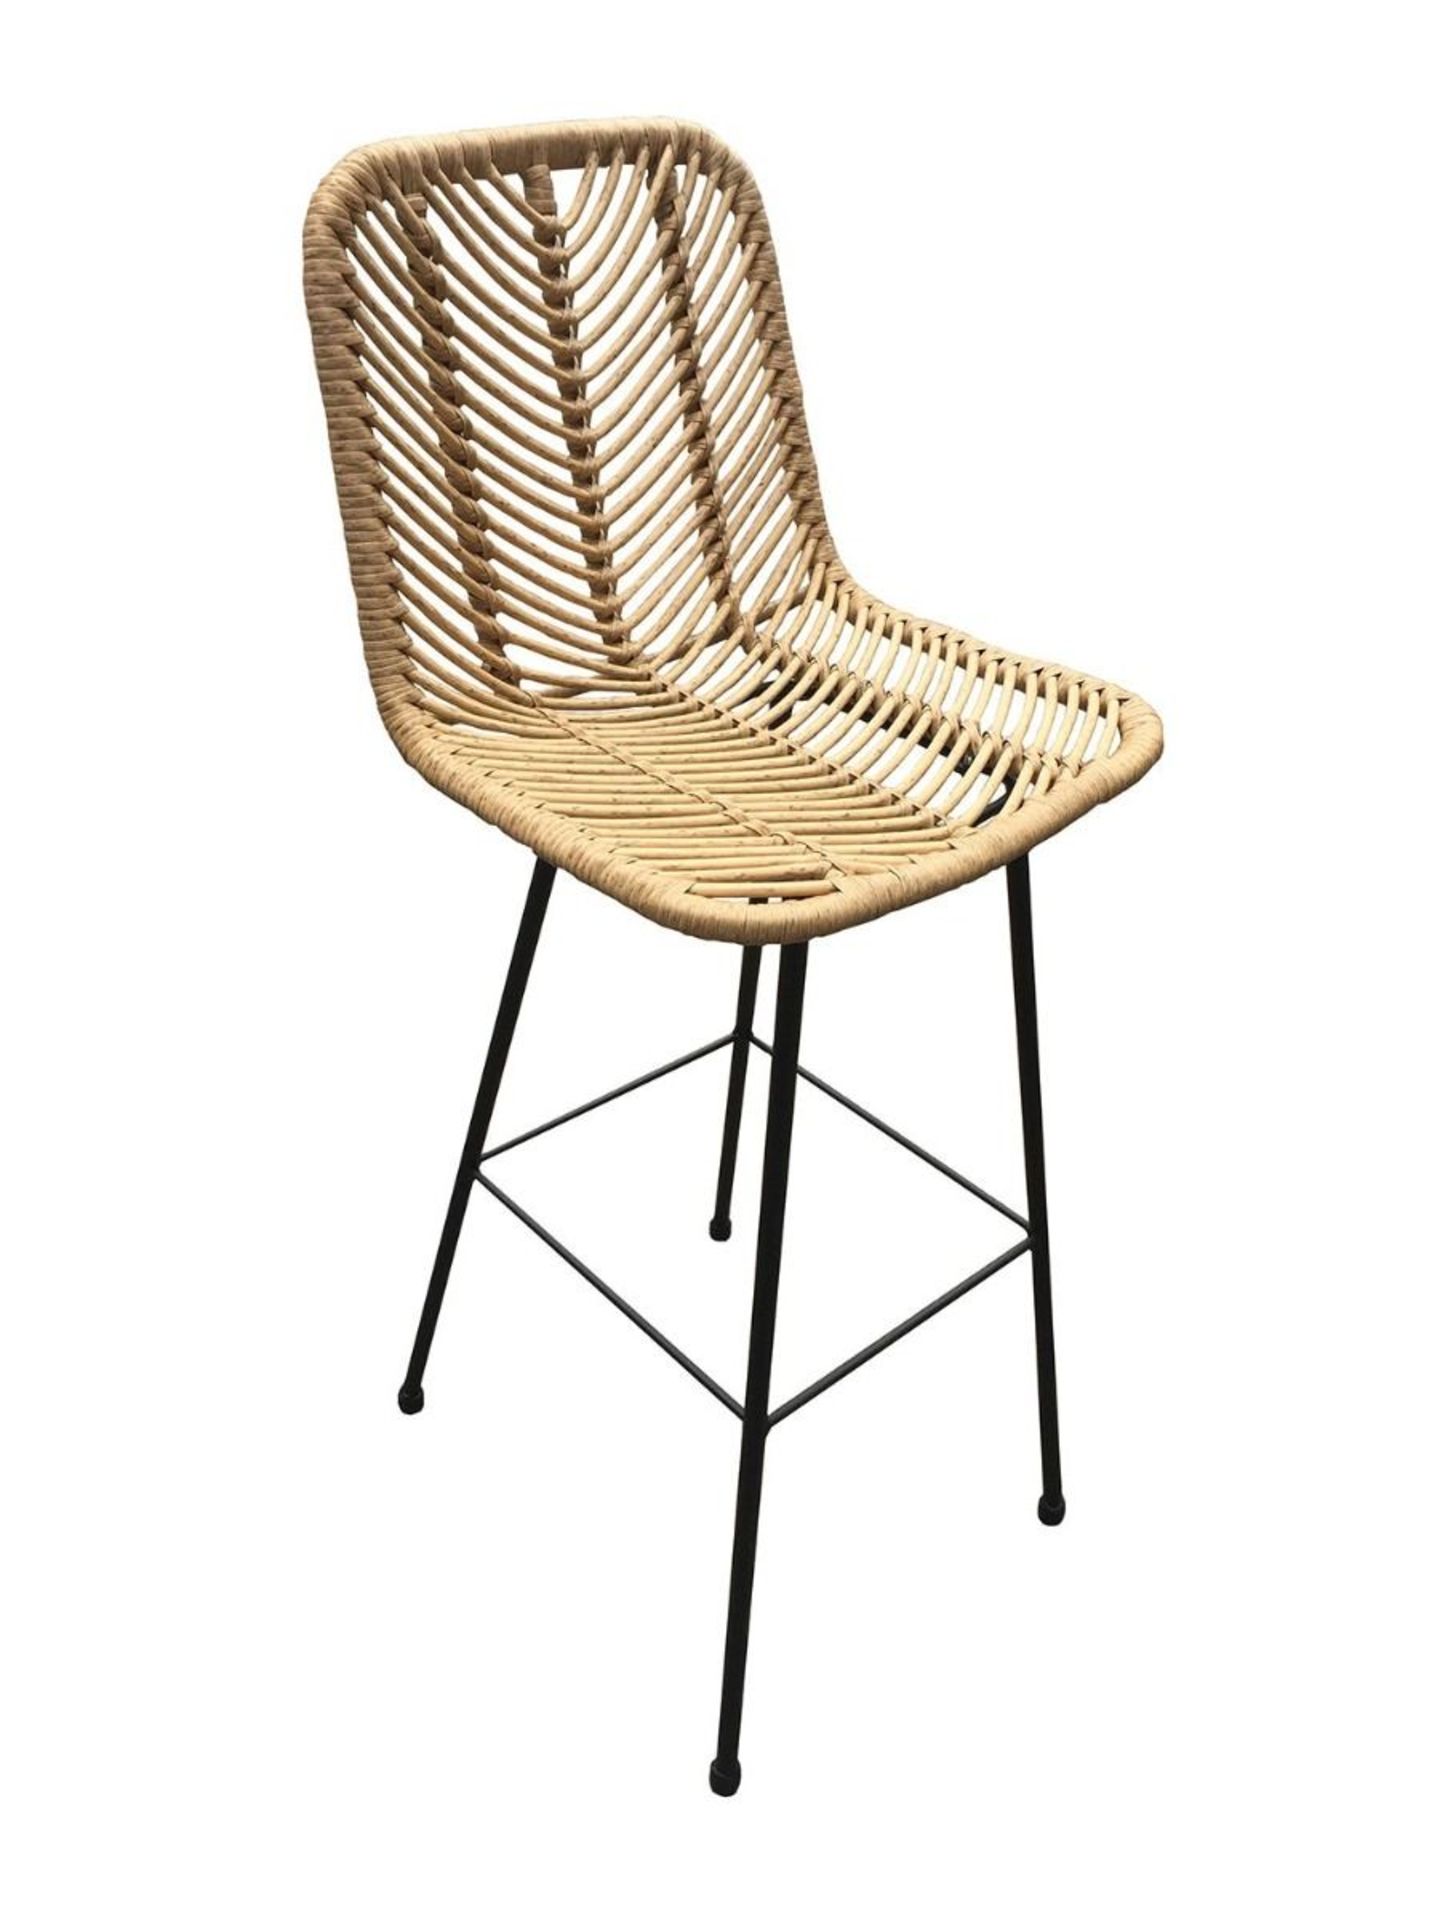 A1 PRODUCT NEW -   x2 (PAIR) OF RAFFERTY RETRO WOVEN RATTAN BAR STOOLS IN NATURA COLOUR WITH BLACK M - Image 3 of 3